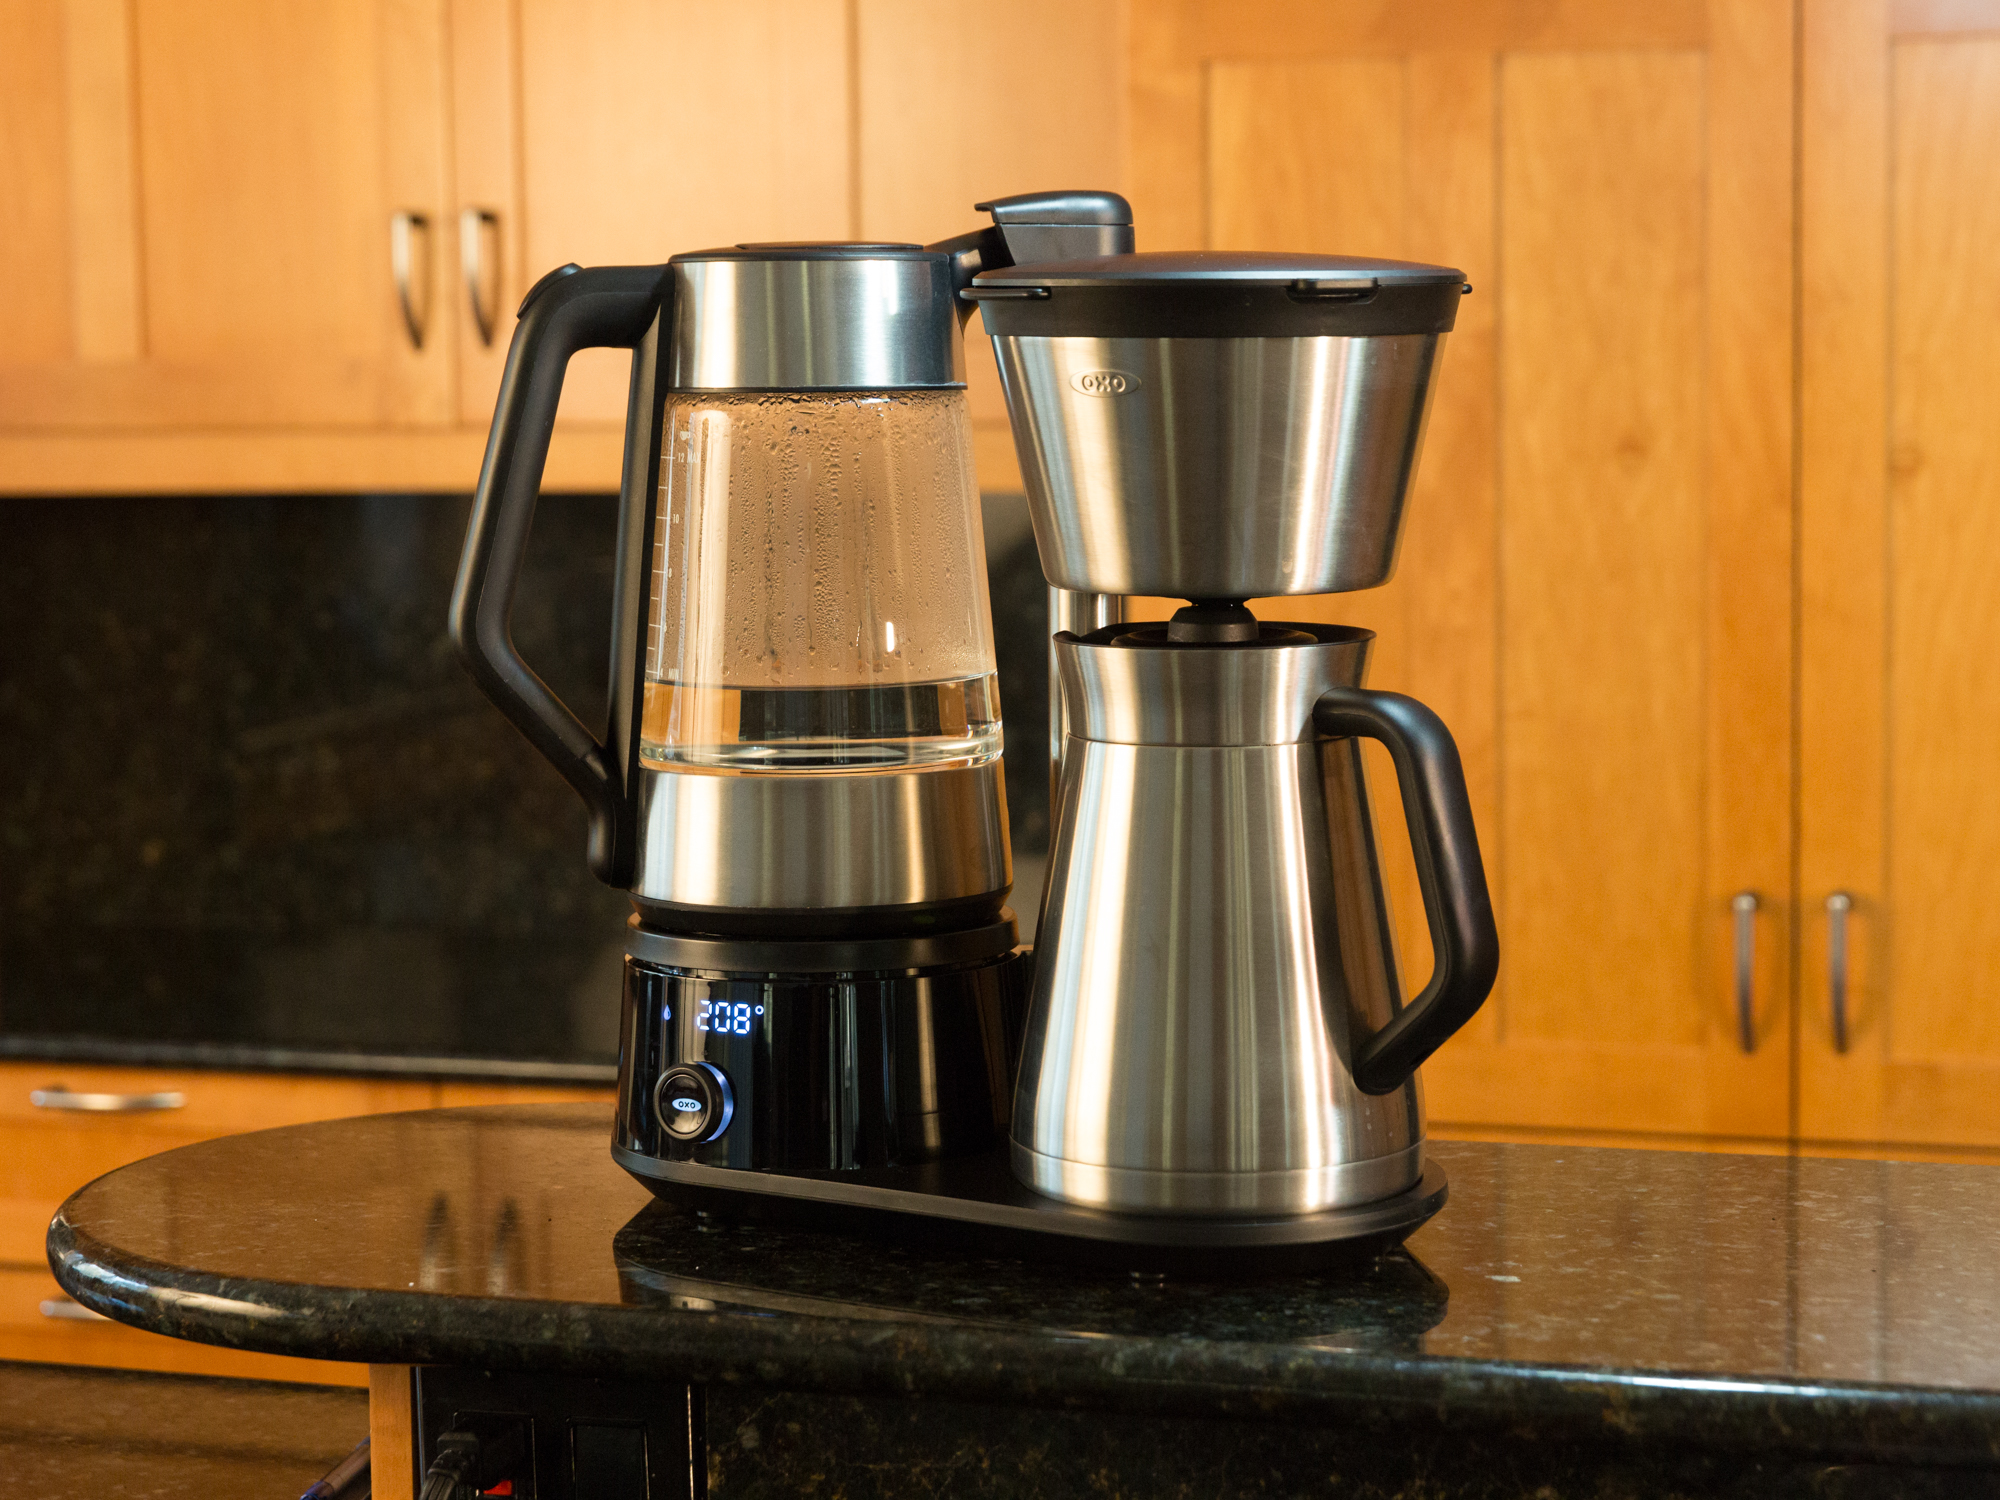 Oxo Barista Brain 12-cup Brewing System review: Oxo's Barista